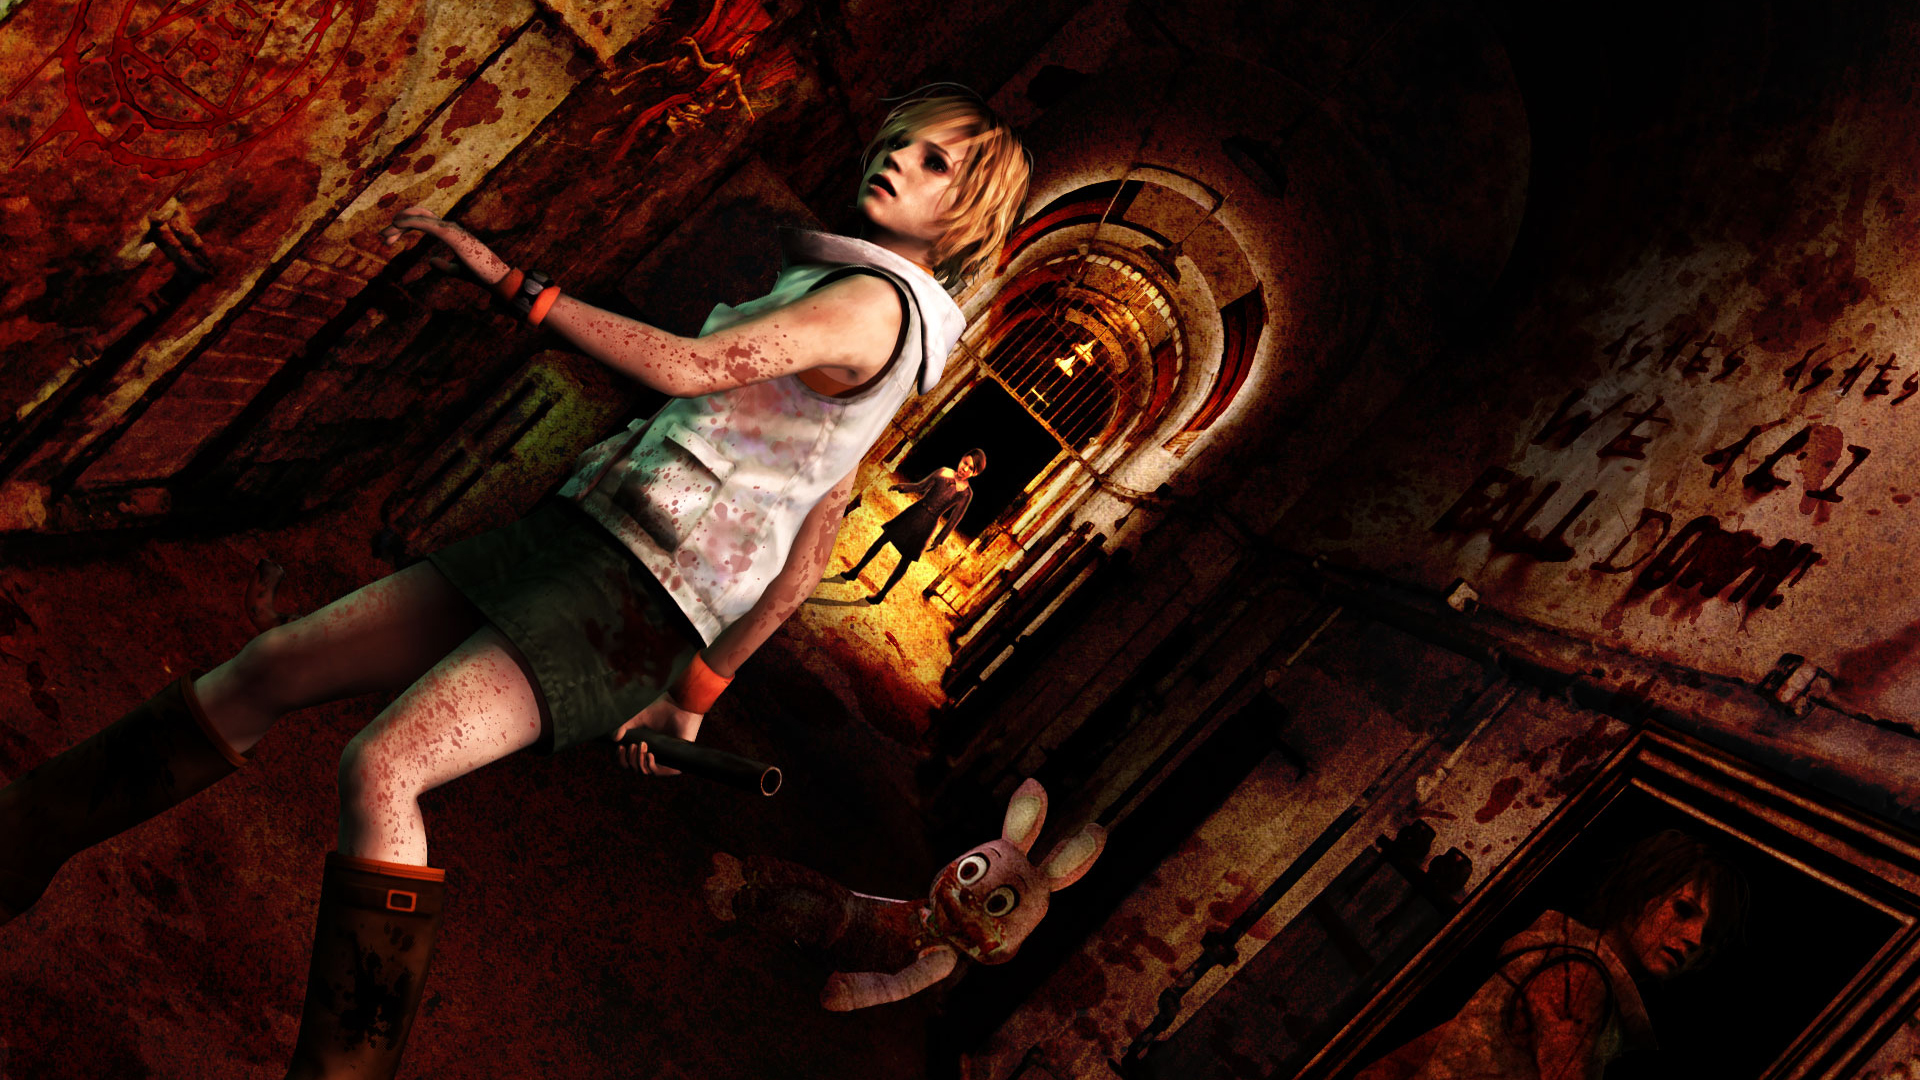 Game Silent Hill Horror Creepy Spooky Scary Wallpaper